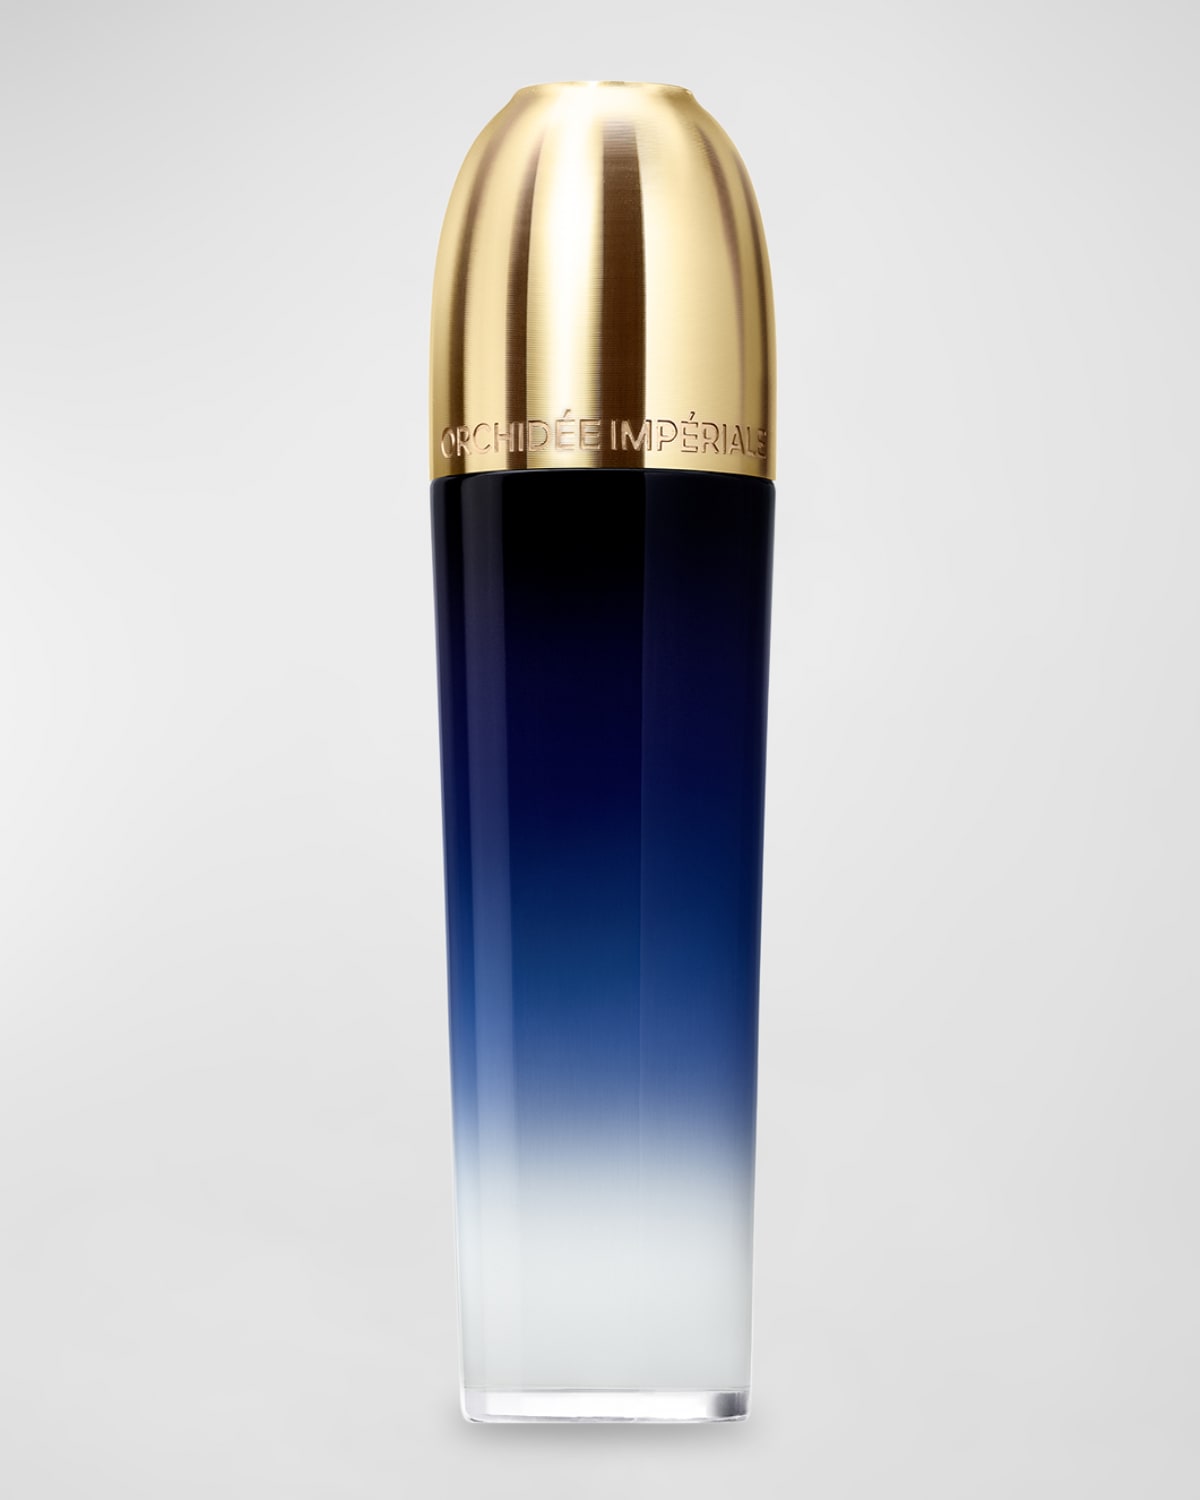 Shop Guerlain Orchidee Imperiale The Essence Lotion Concentrate Emulsion 4.7 Oz.